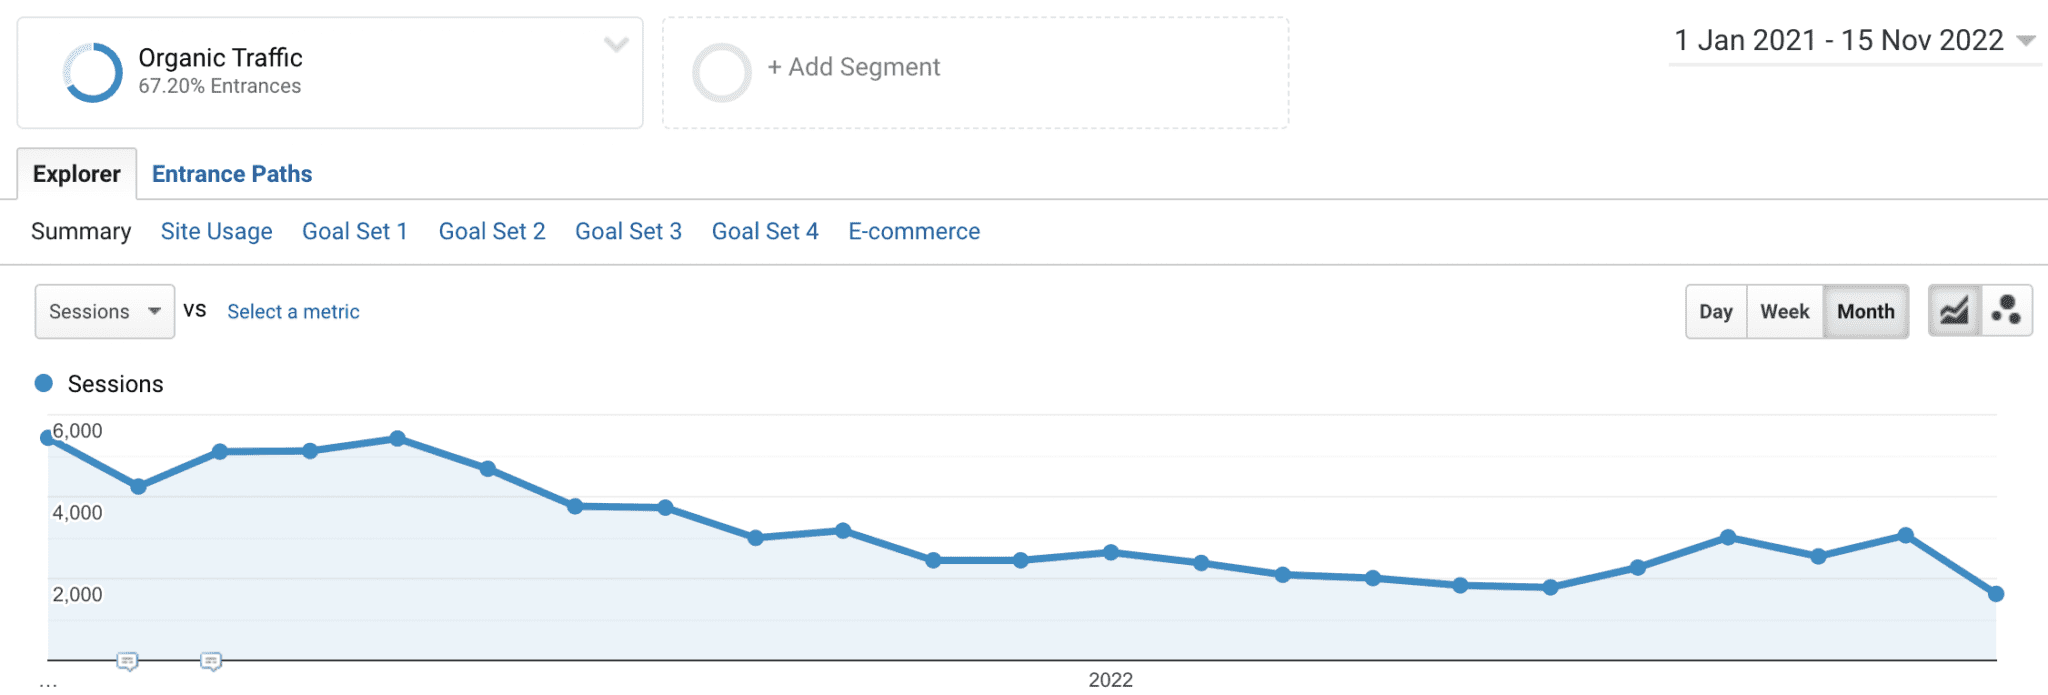 Organic Traffic Declining - Image from an SEO Consultancy